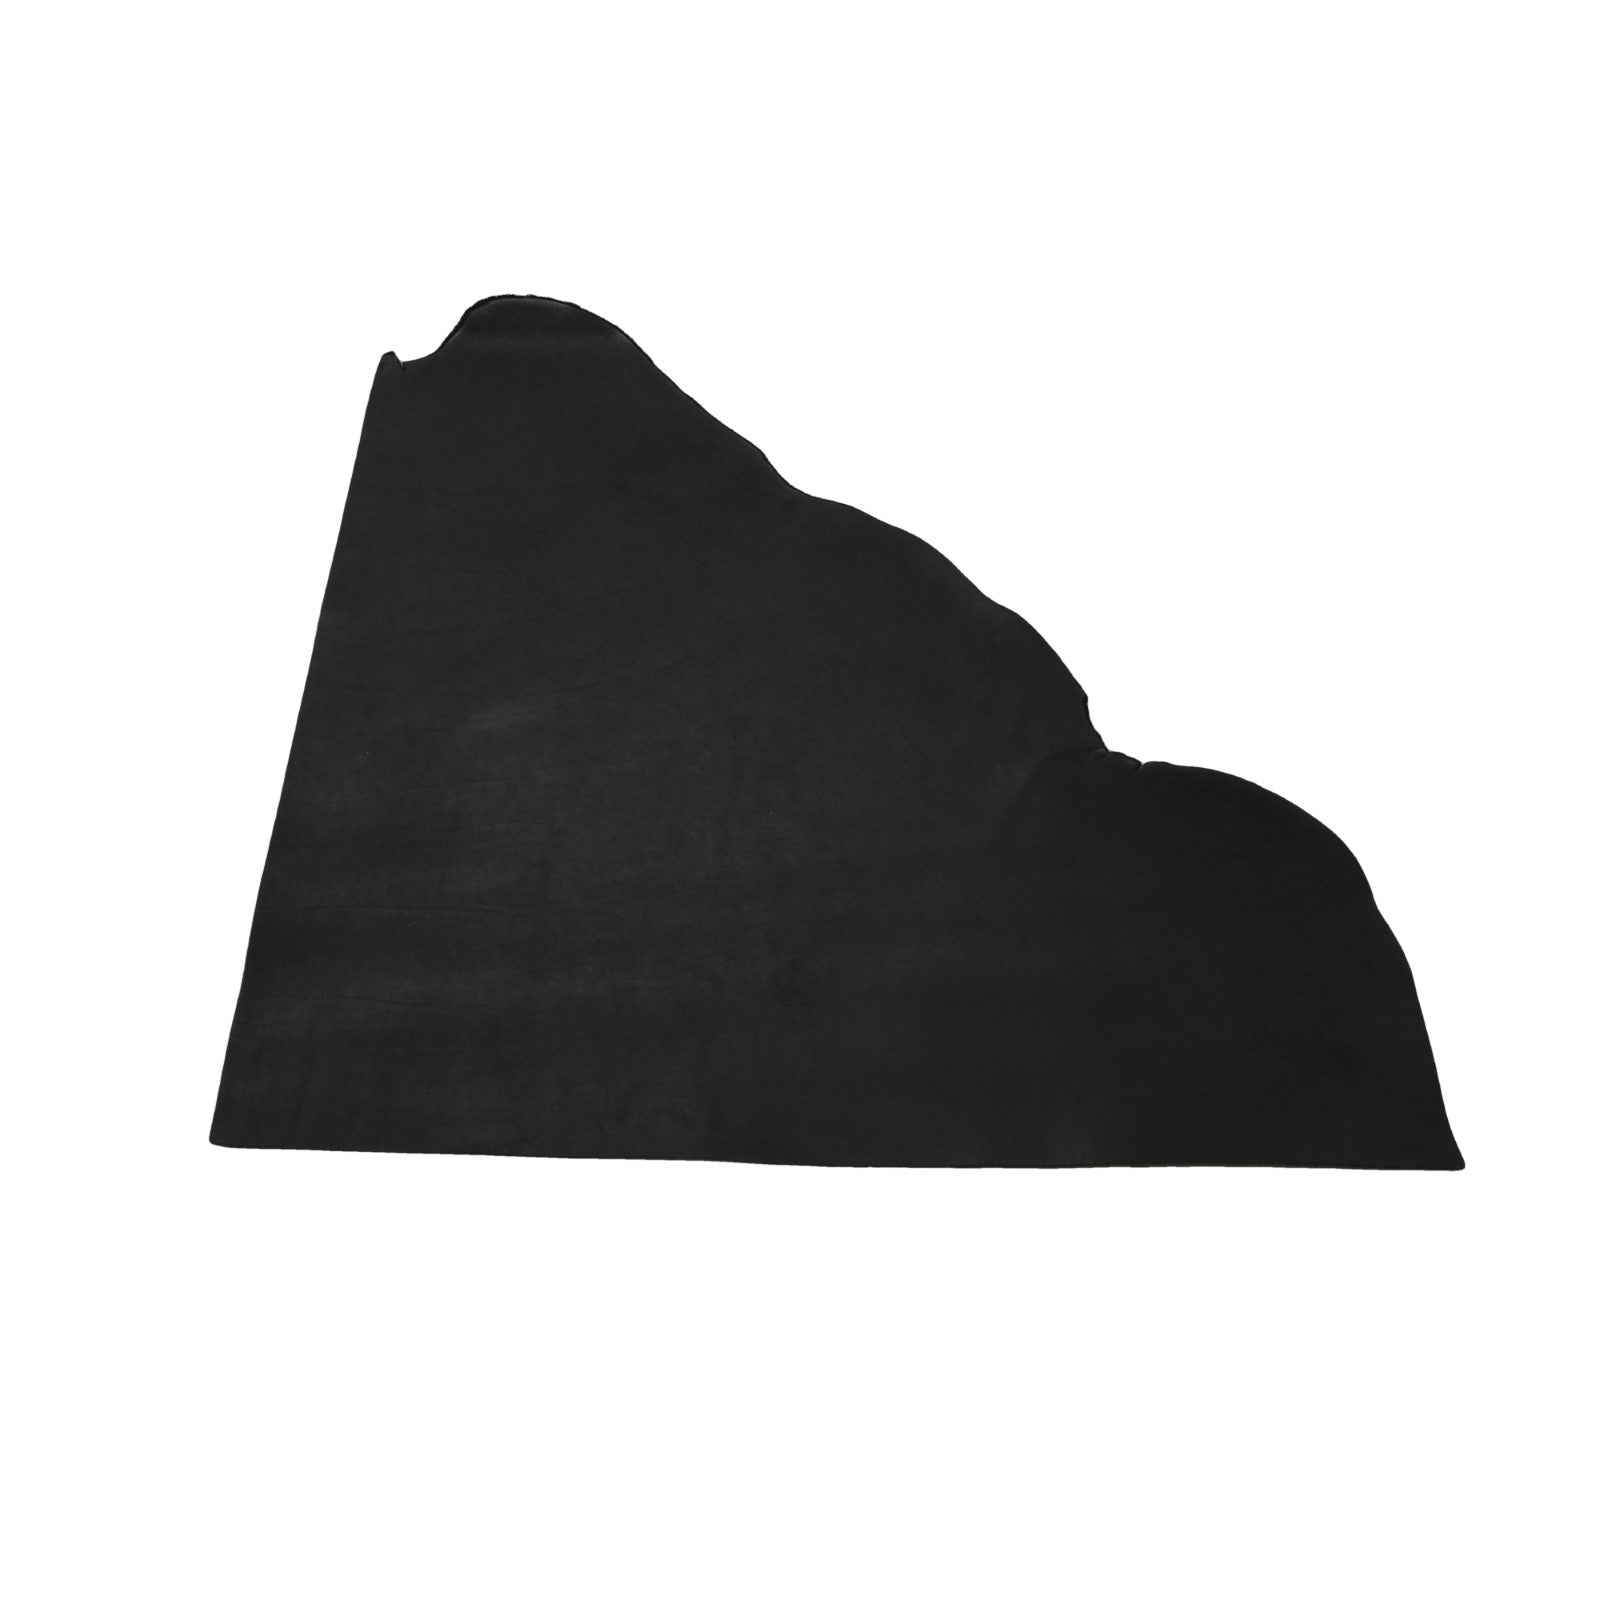 Back Country Black, 18-29 Sq Ft Oil Tanned Sides, Summits Edge, Top Piece / 6.5 - 7.5 Sq Ft | The Leather Guy